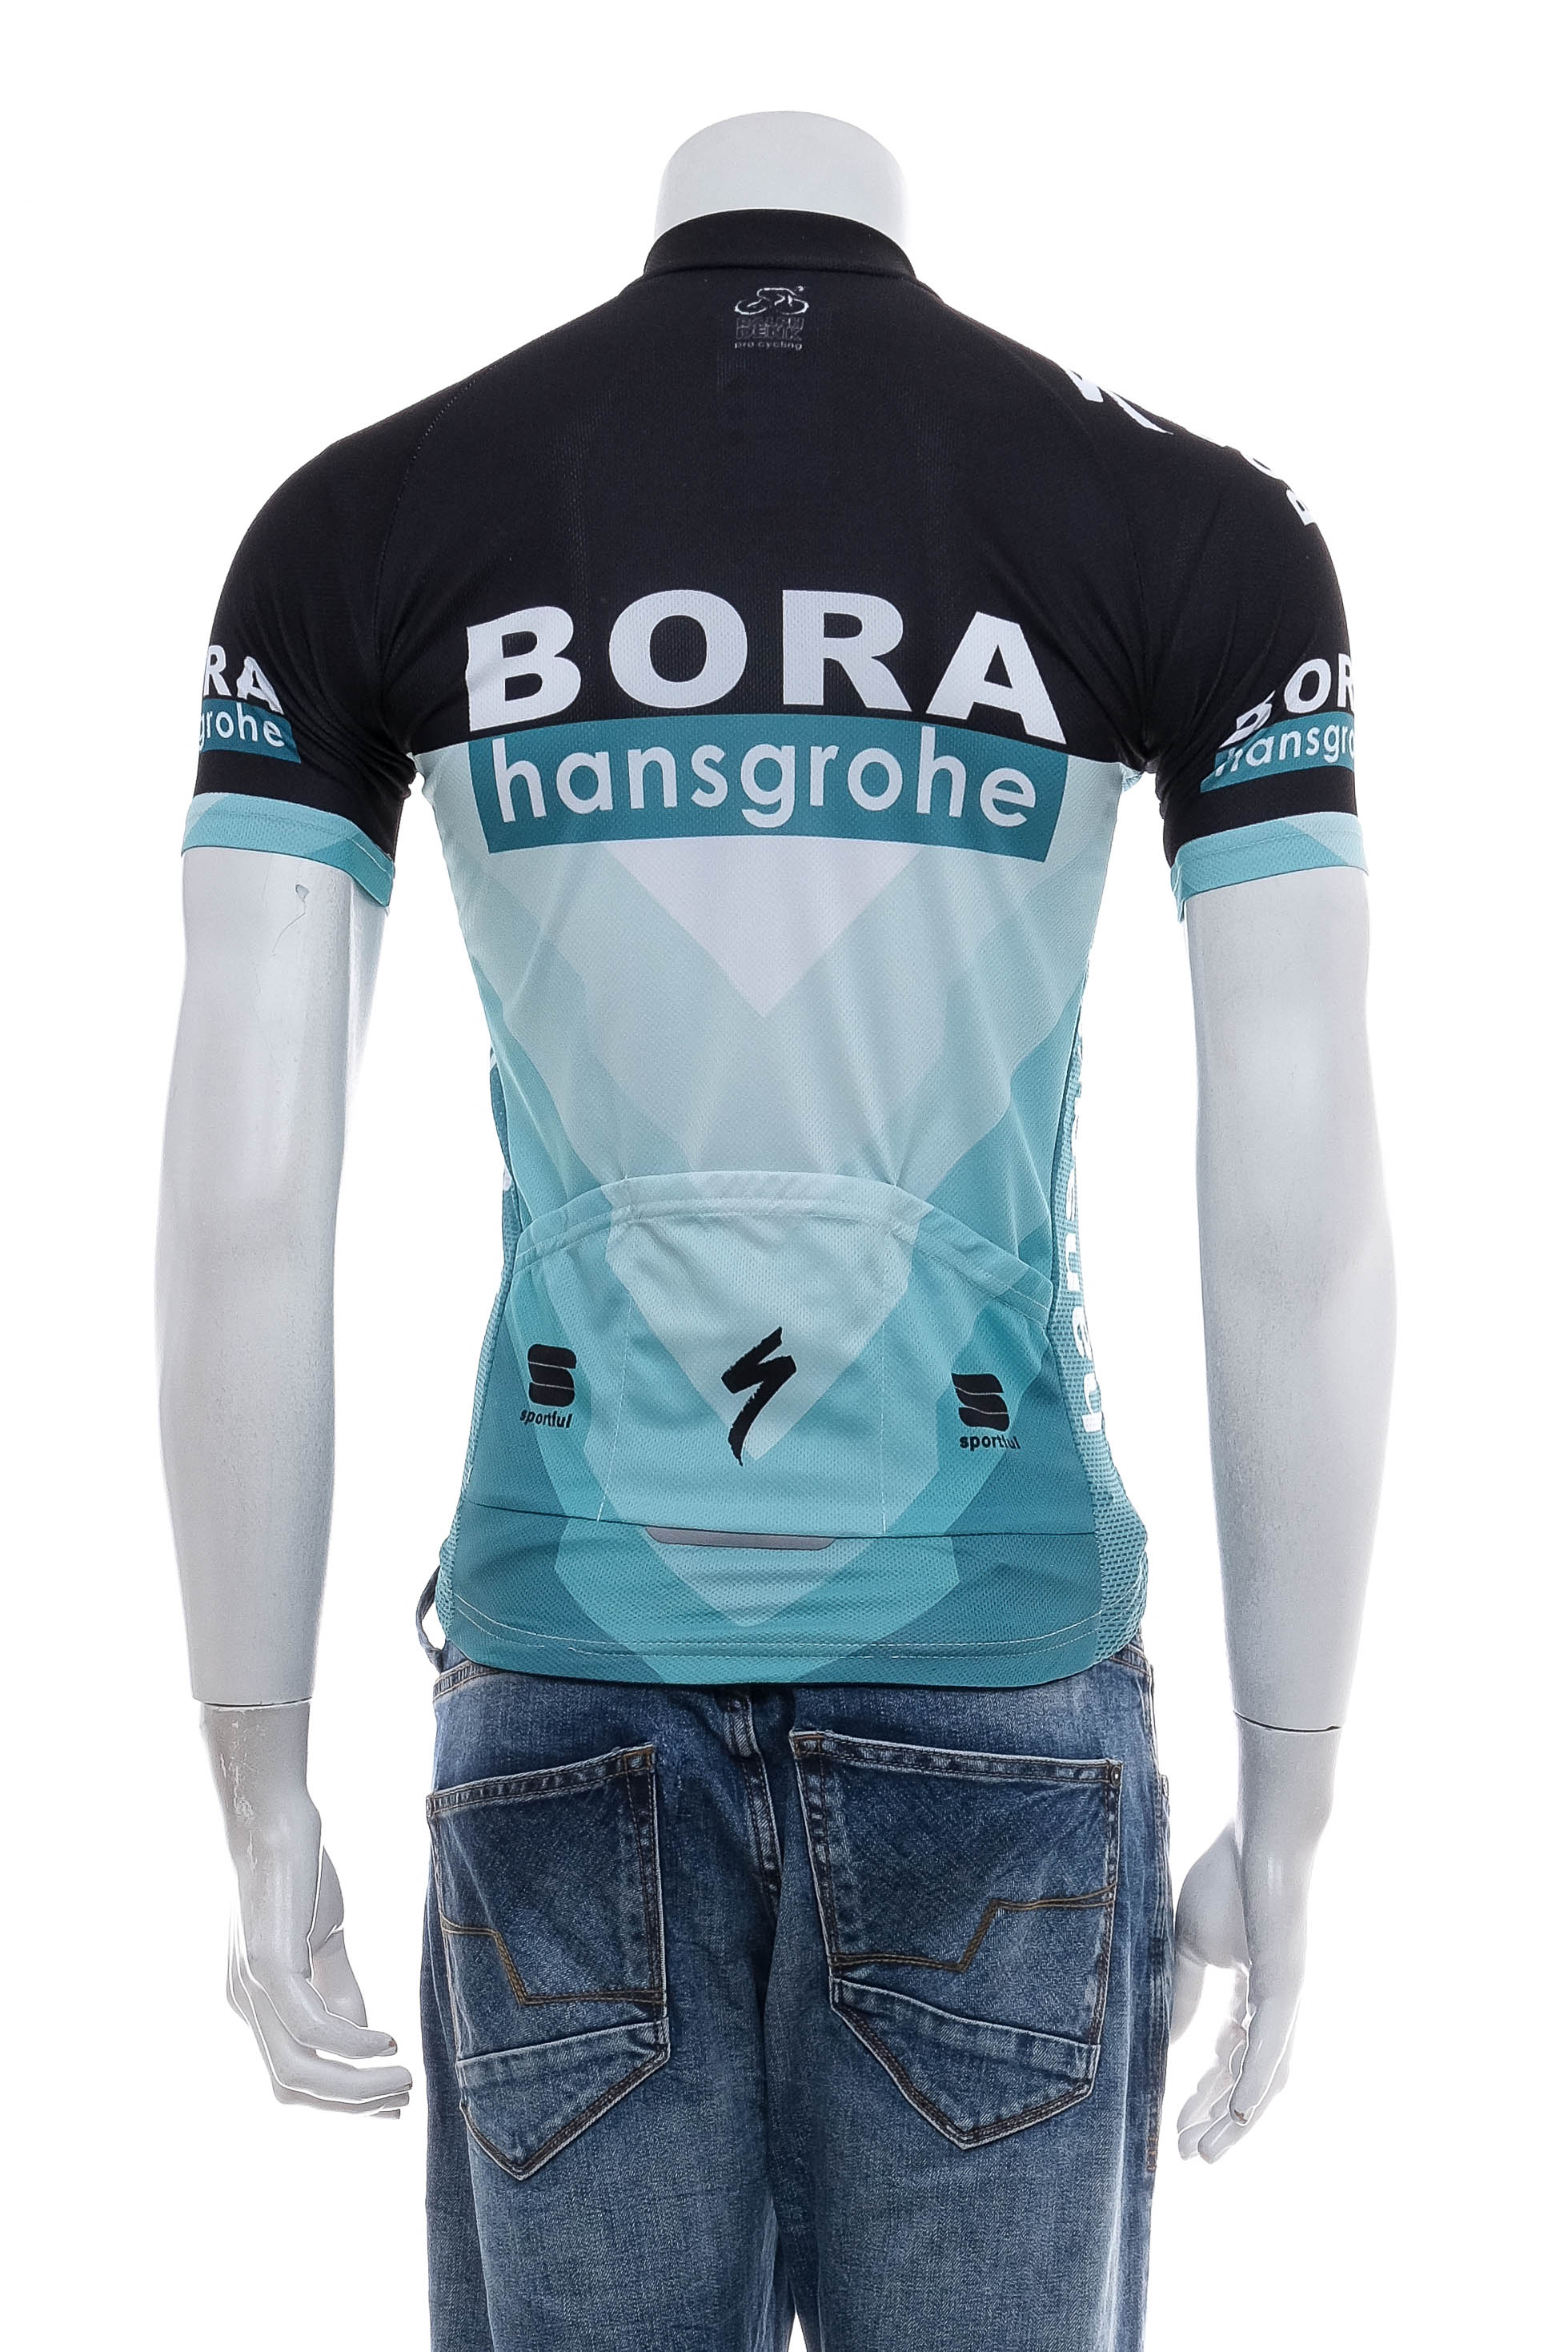 Male sports top for cycling - BORA - 1